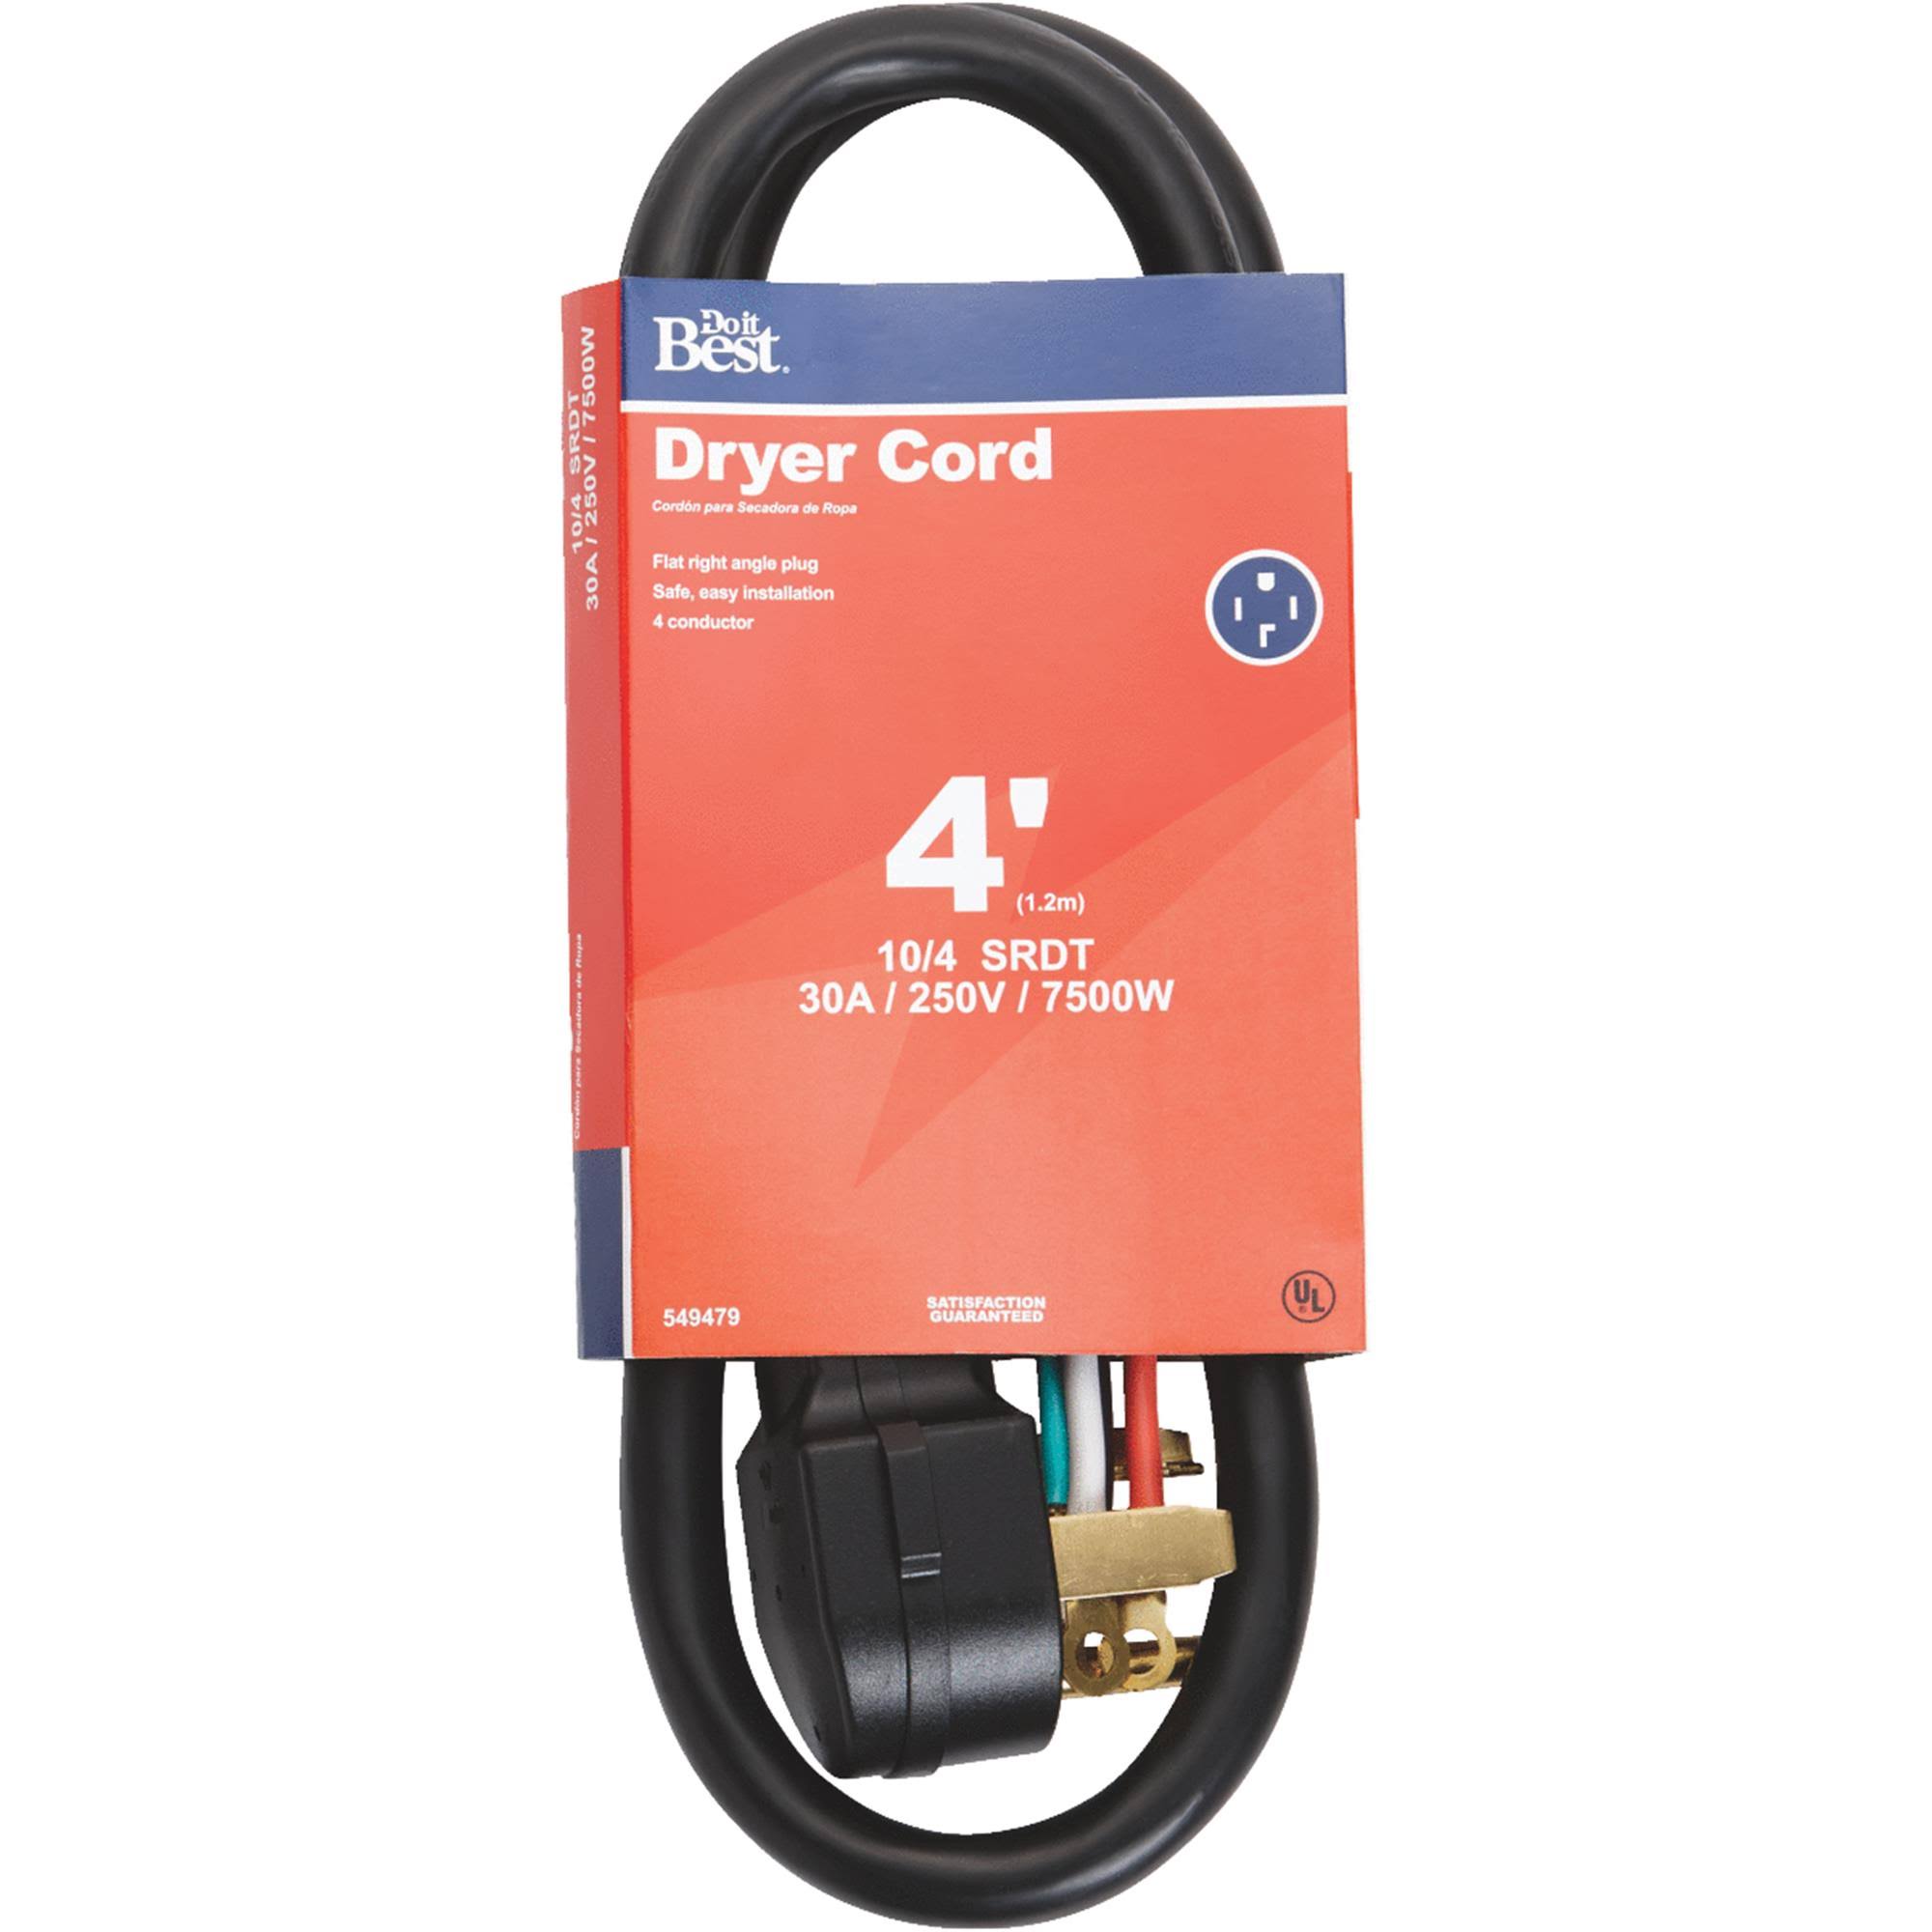 Dryer Power Supply Cord Woods Extension Cords - Black, 4', 30 Amp